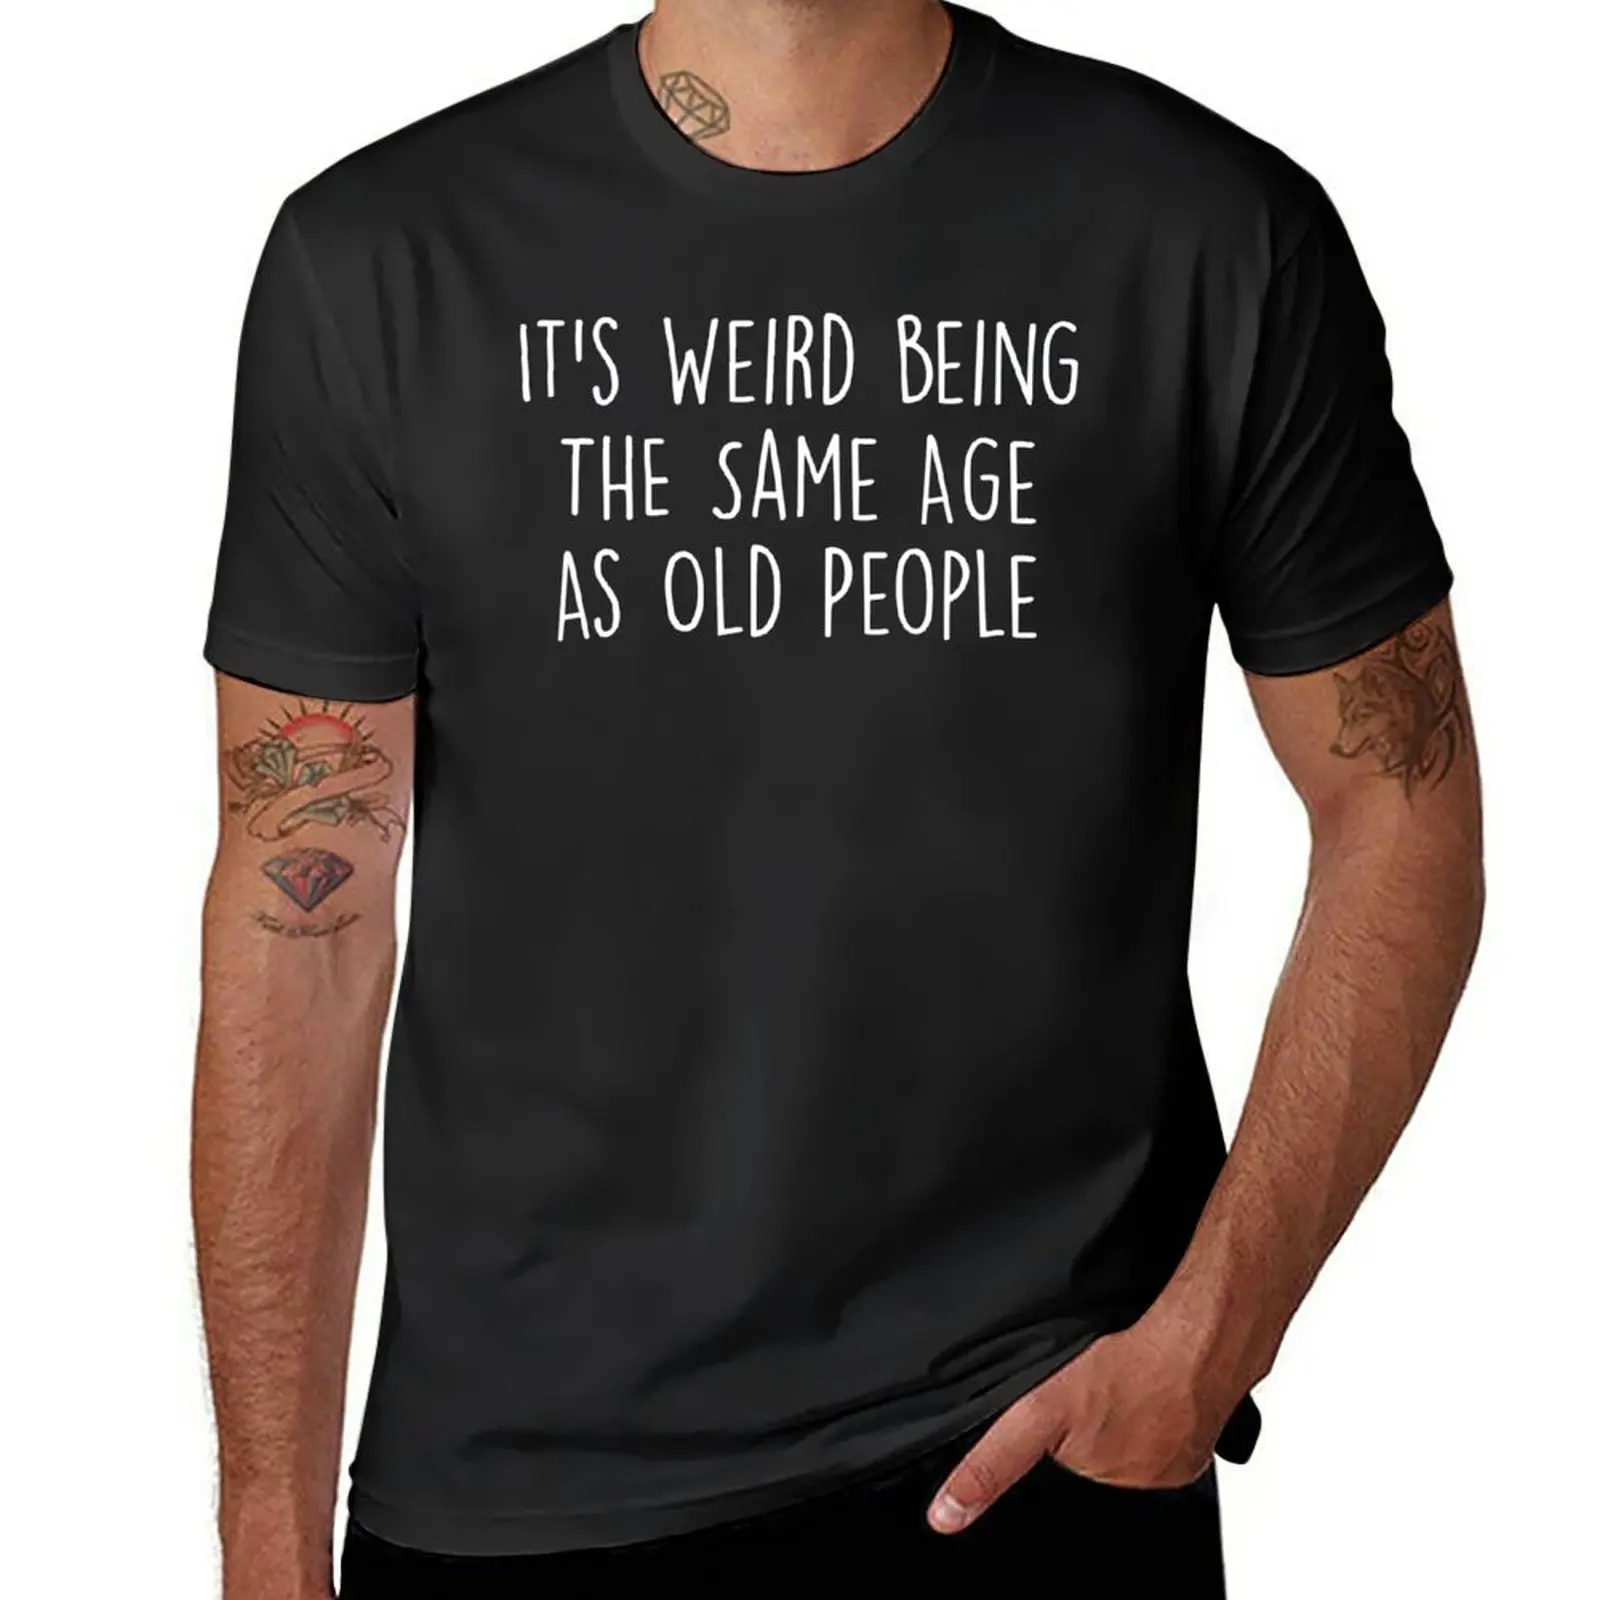 

New It's Weird Being The Same Age As Old People T-Shirt Short sleeve custom t shirts oversized t shirt men